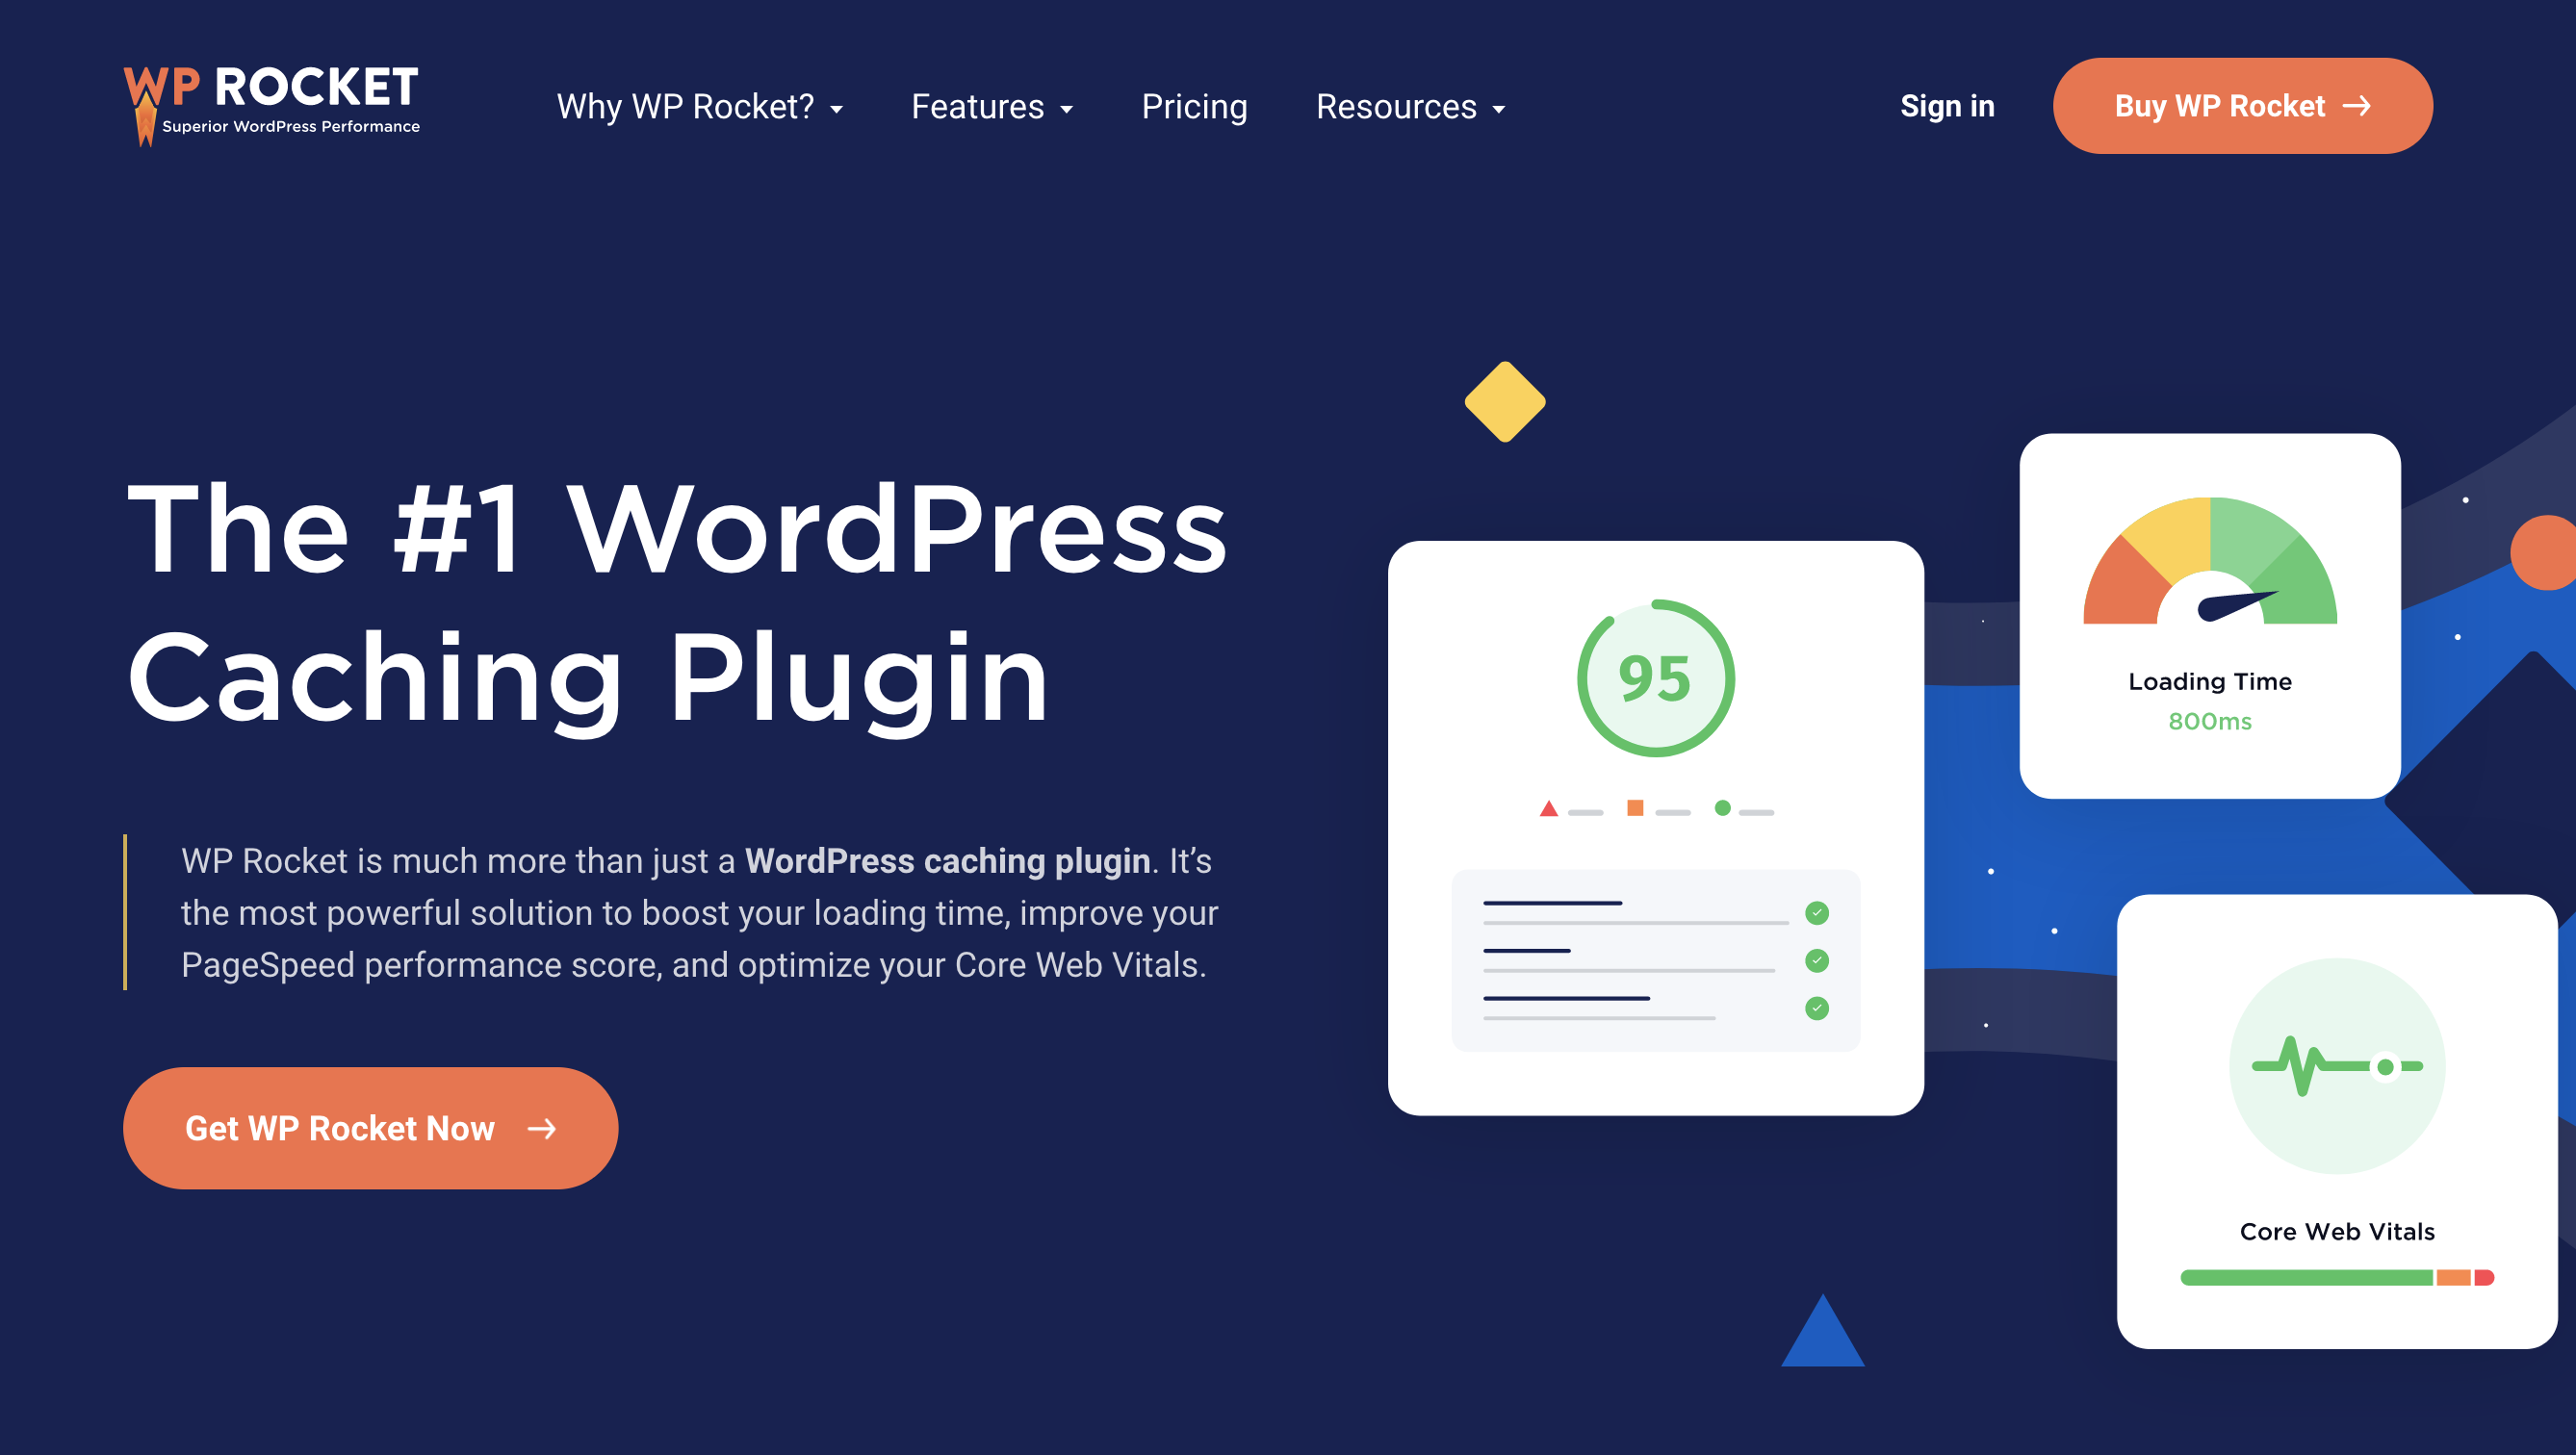 WP Rocket is a caching plugin for WordPress.